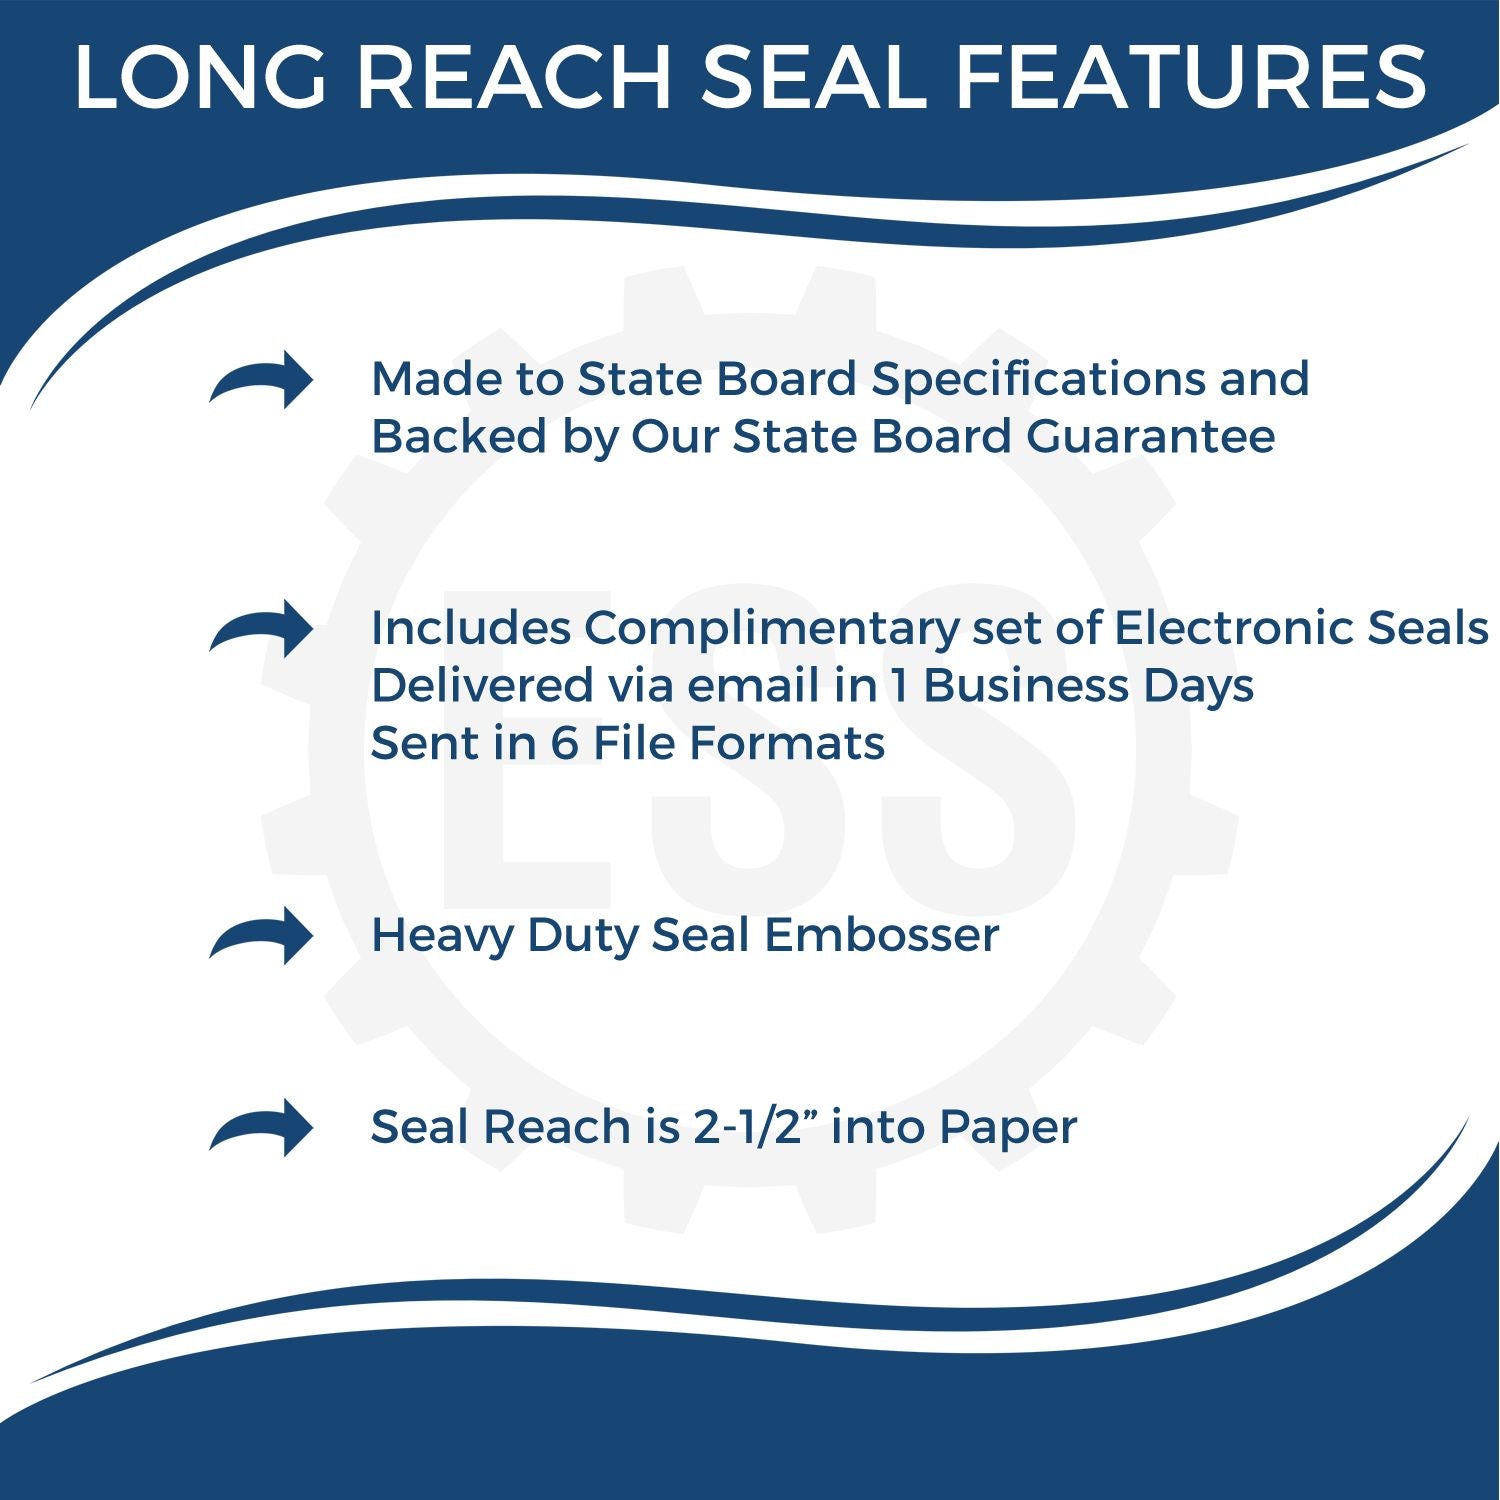 The main image for the Long Reach Ohio PE Seal depicting a sample of the imprint and electronic files